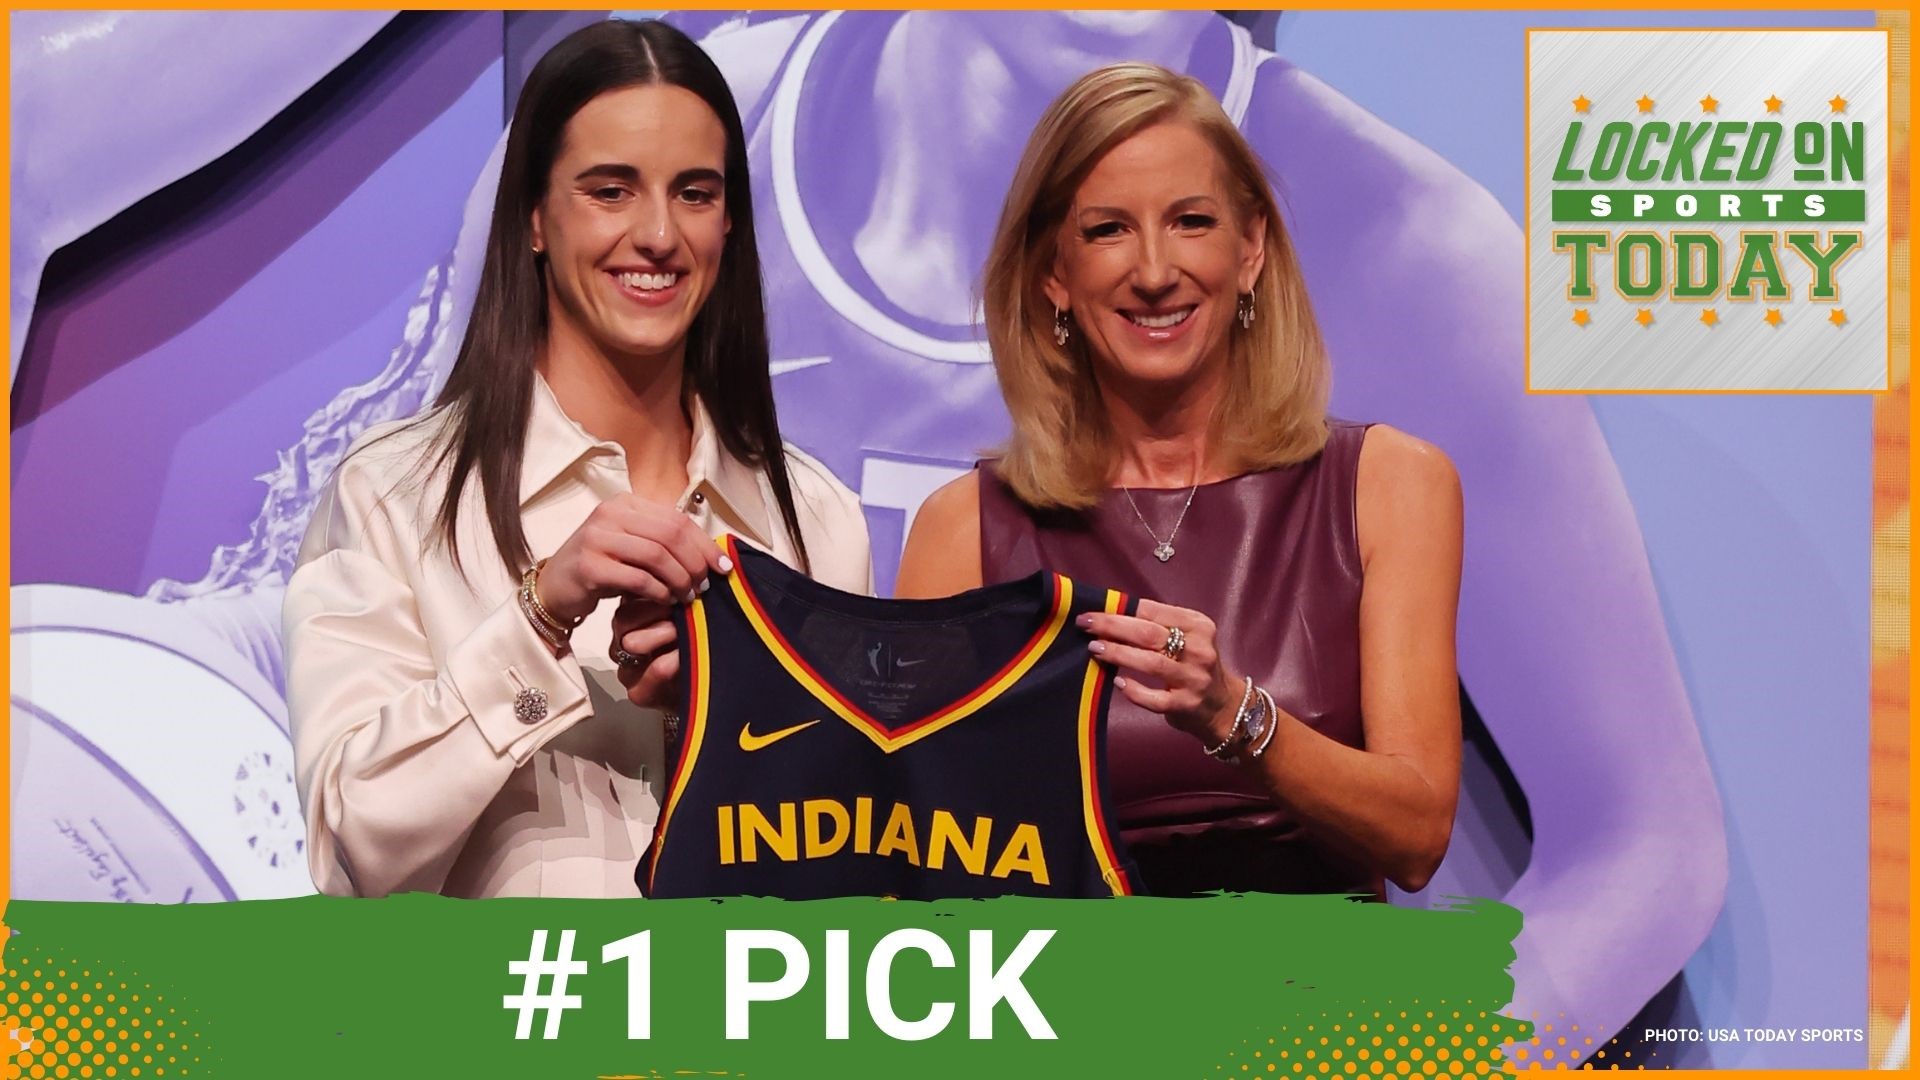 Discussing the day's top sports stories from Caitlin Clark going first in the WNBA draft to will the Lakers face the Thunder or the Nuggets?